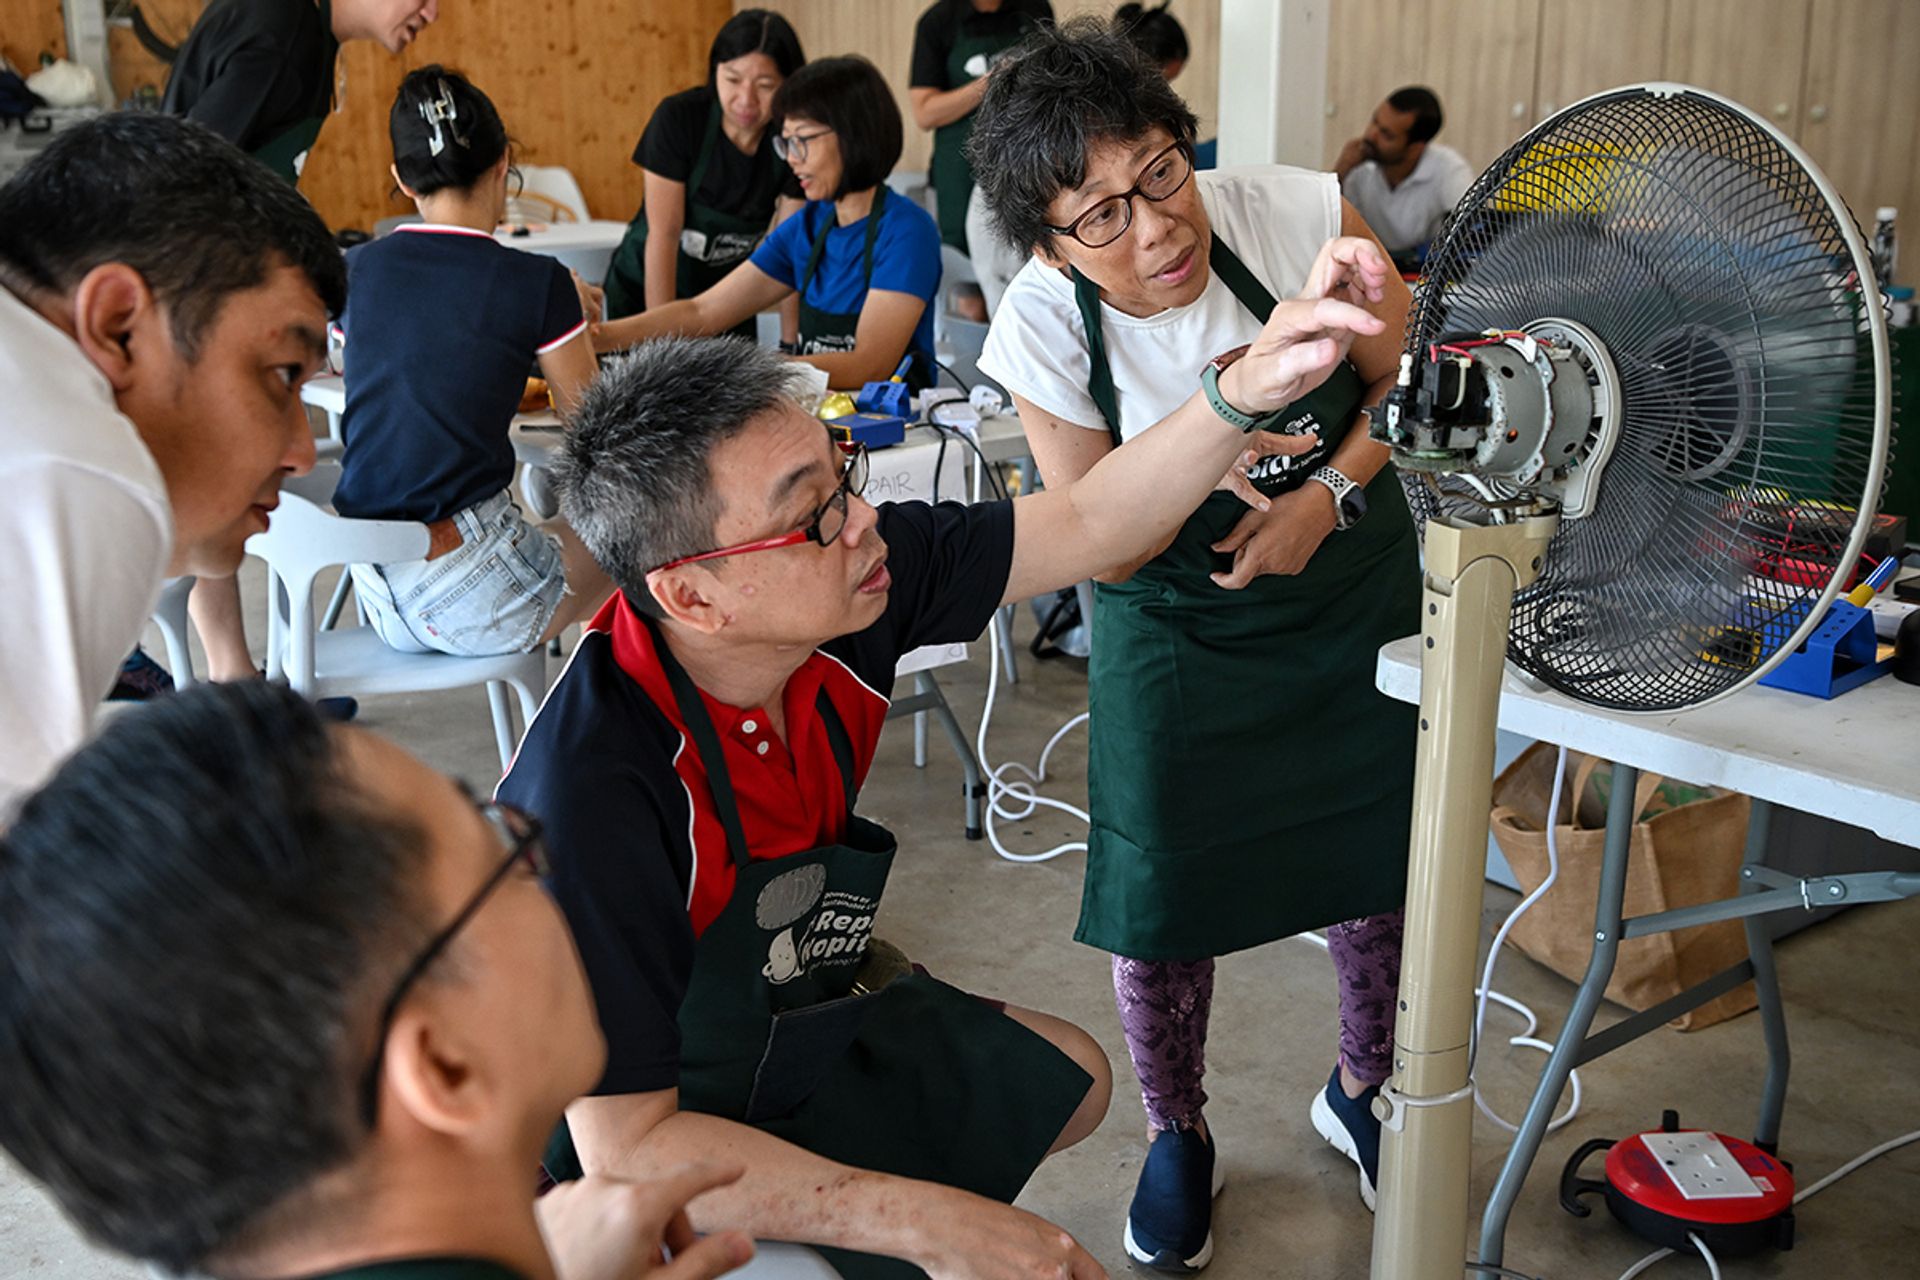 Repair Kopitiam veteran coach Andy Lee, 57, information management director, and trainee coach Jeanette Tan (right) inspecting the parts of a standing fan that was unable to oscillate. ST PHOTO: KUA CHEE SIONG